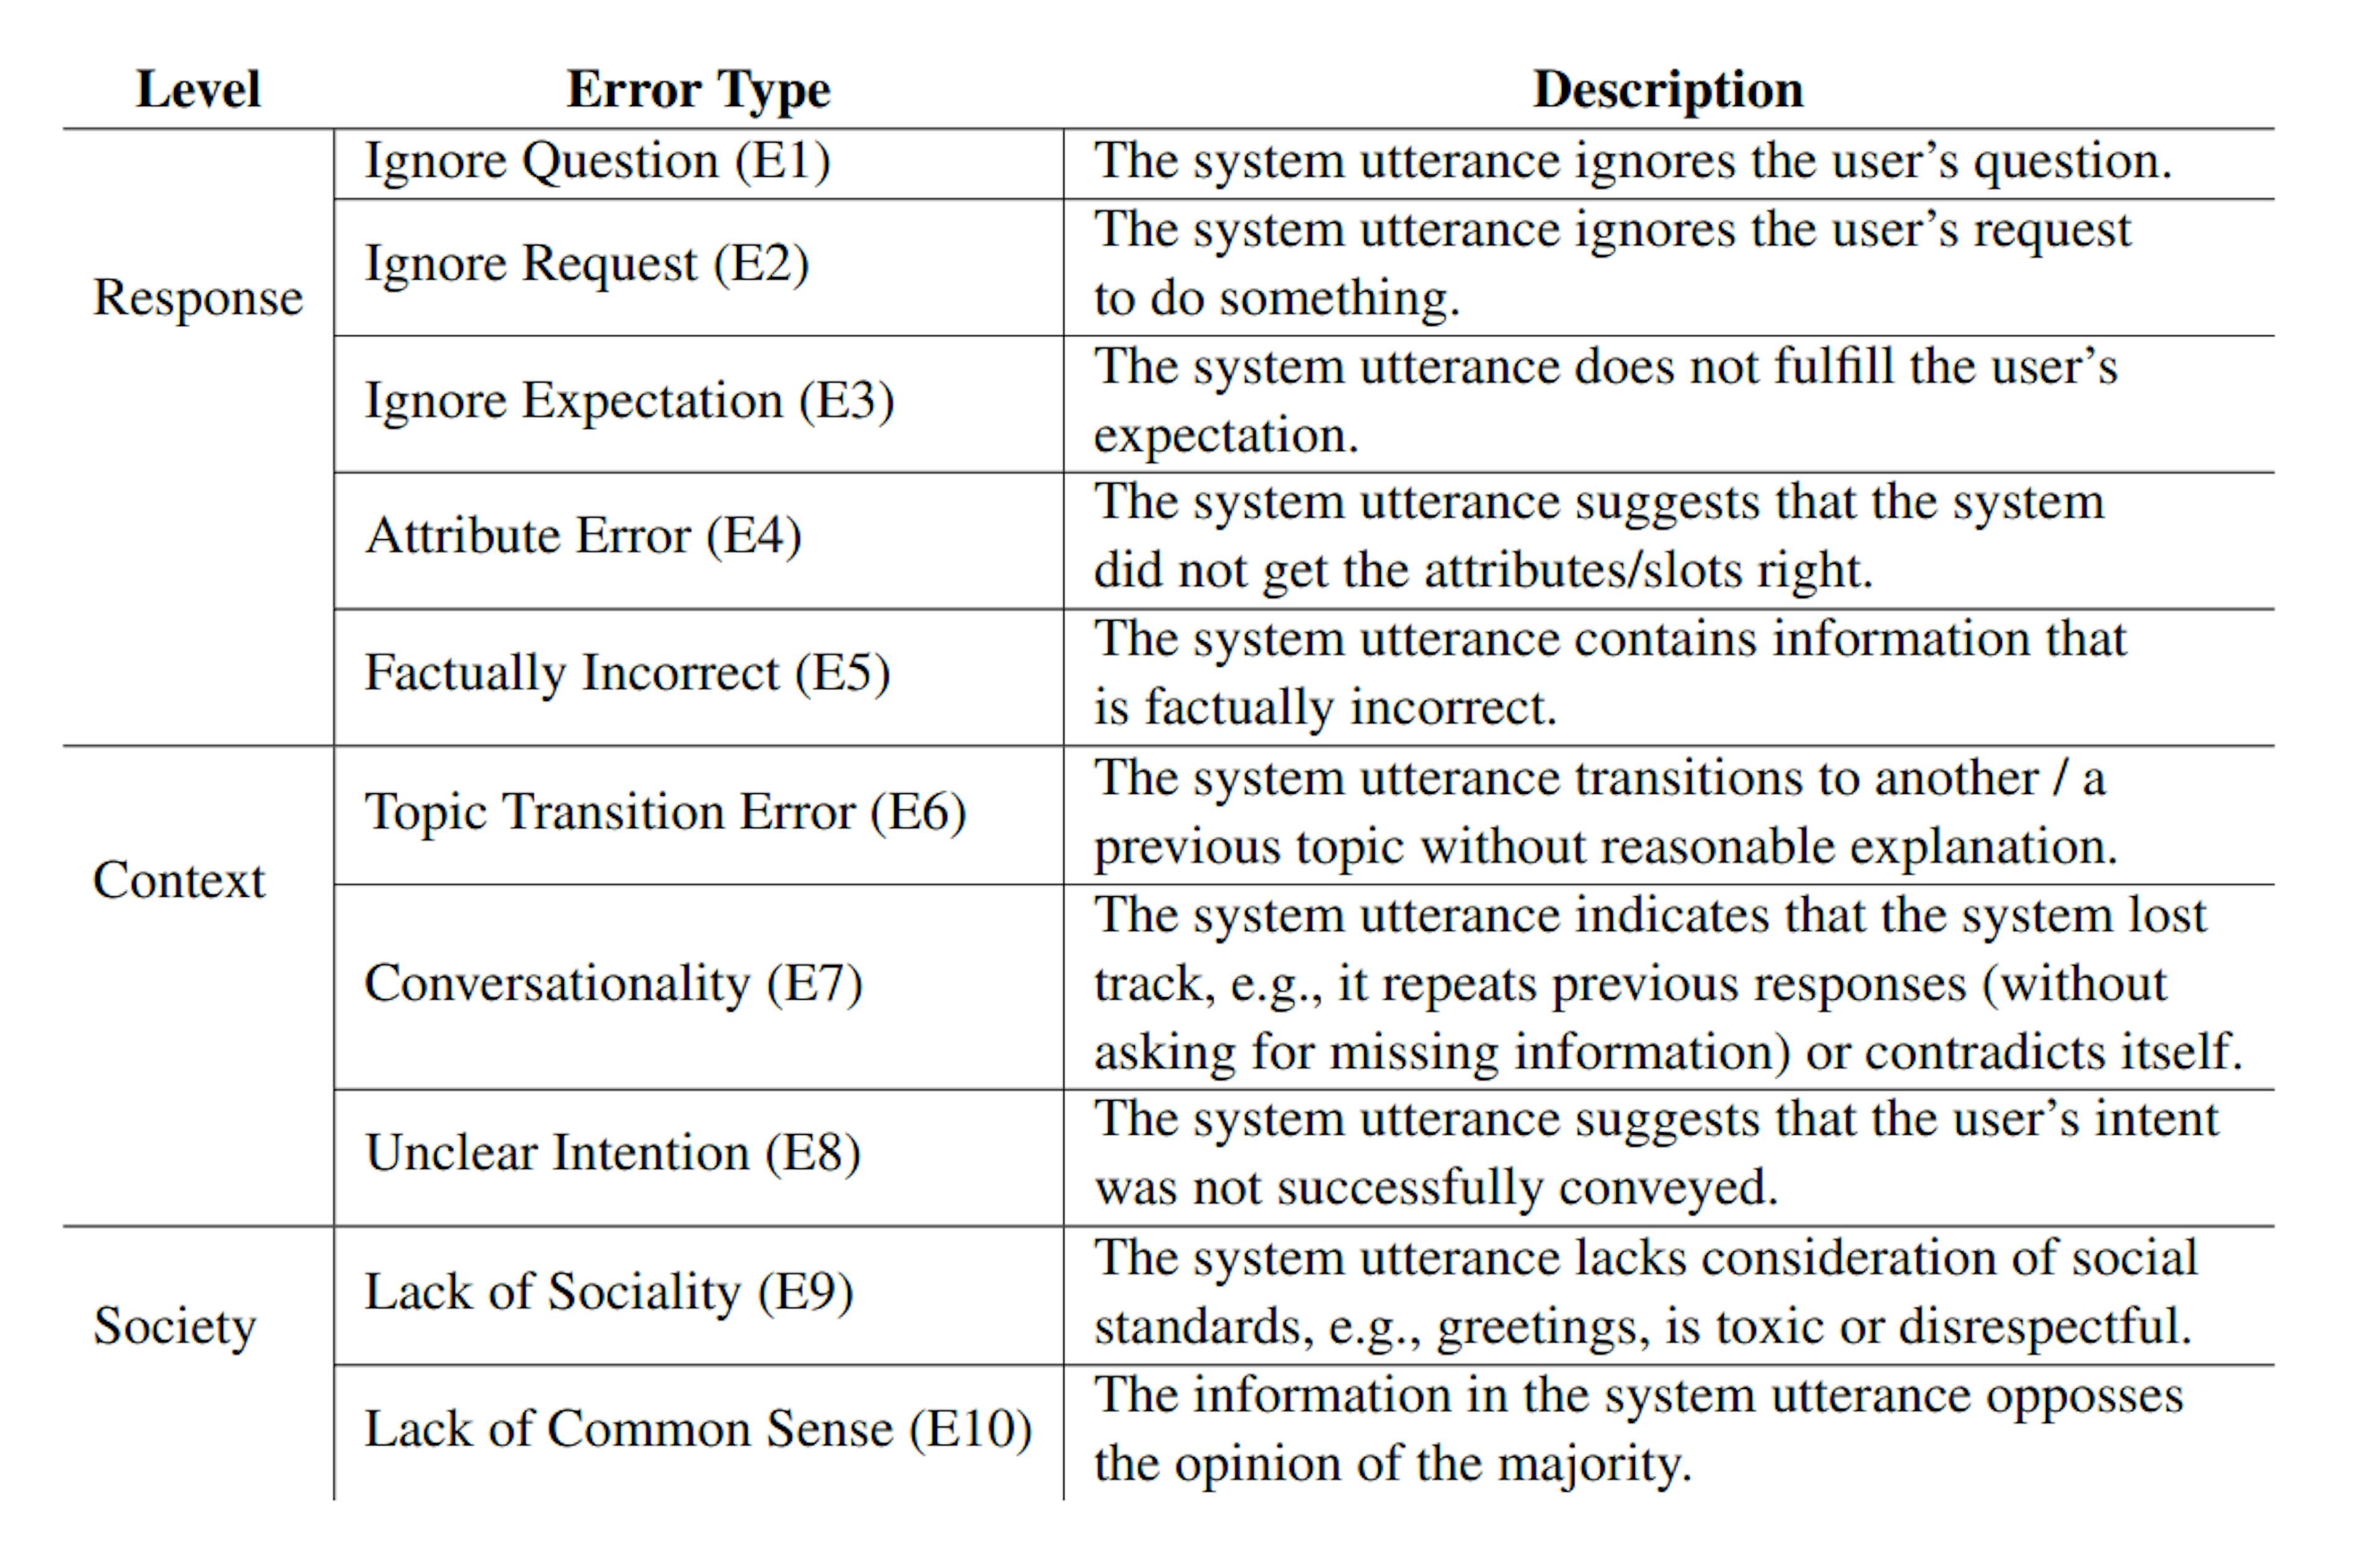 Table 4: Modified Integrated Error Taxonomy.